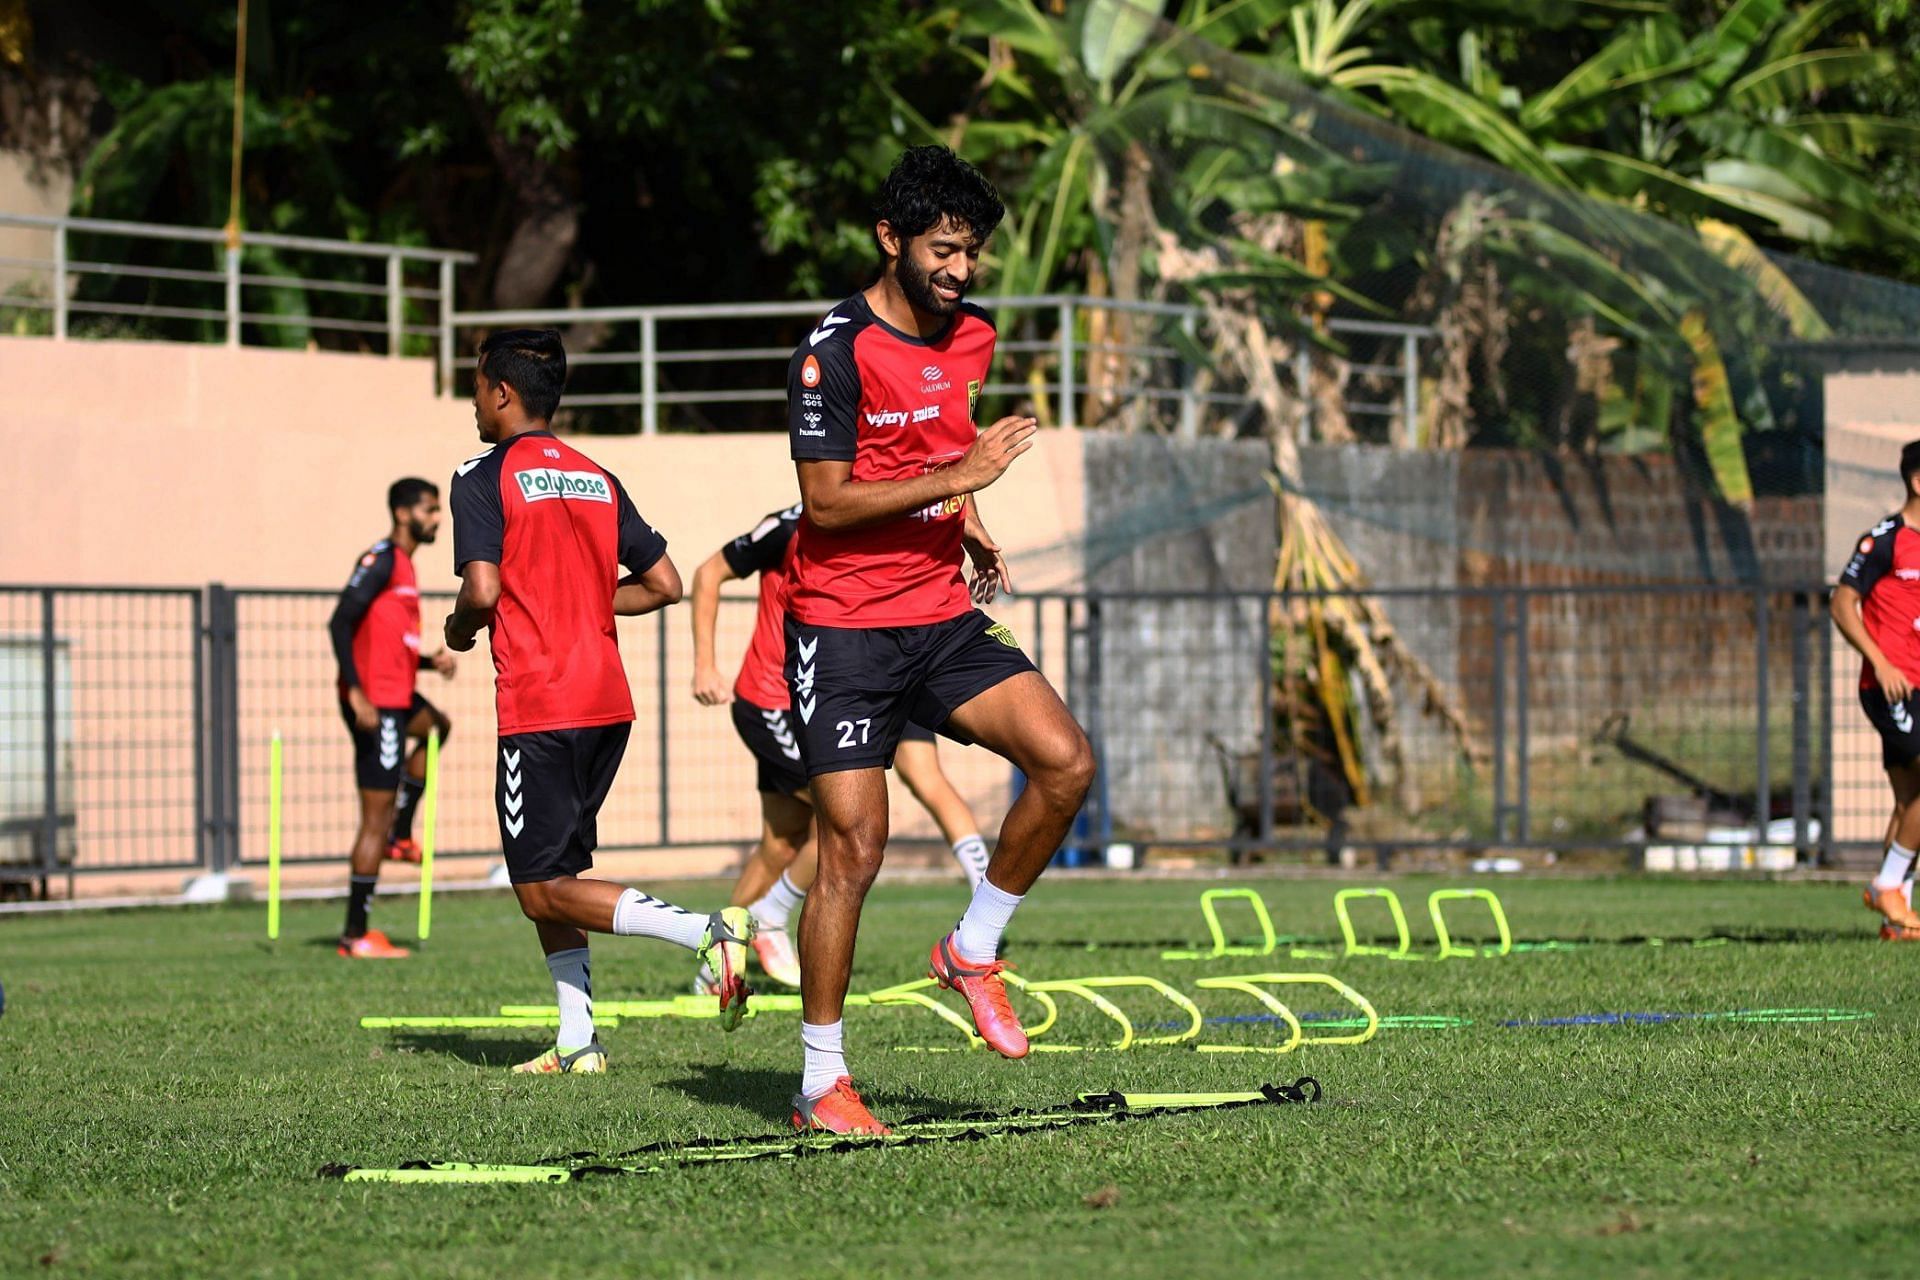 Hyderabad FC players during a training session (Image courtesy: Hyderabad FC Twitter)